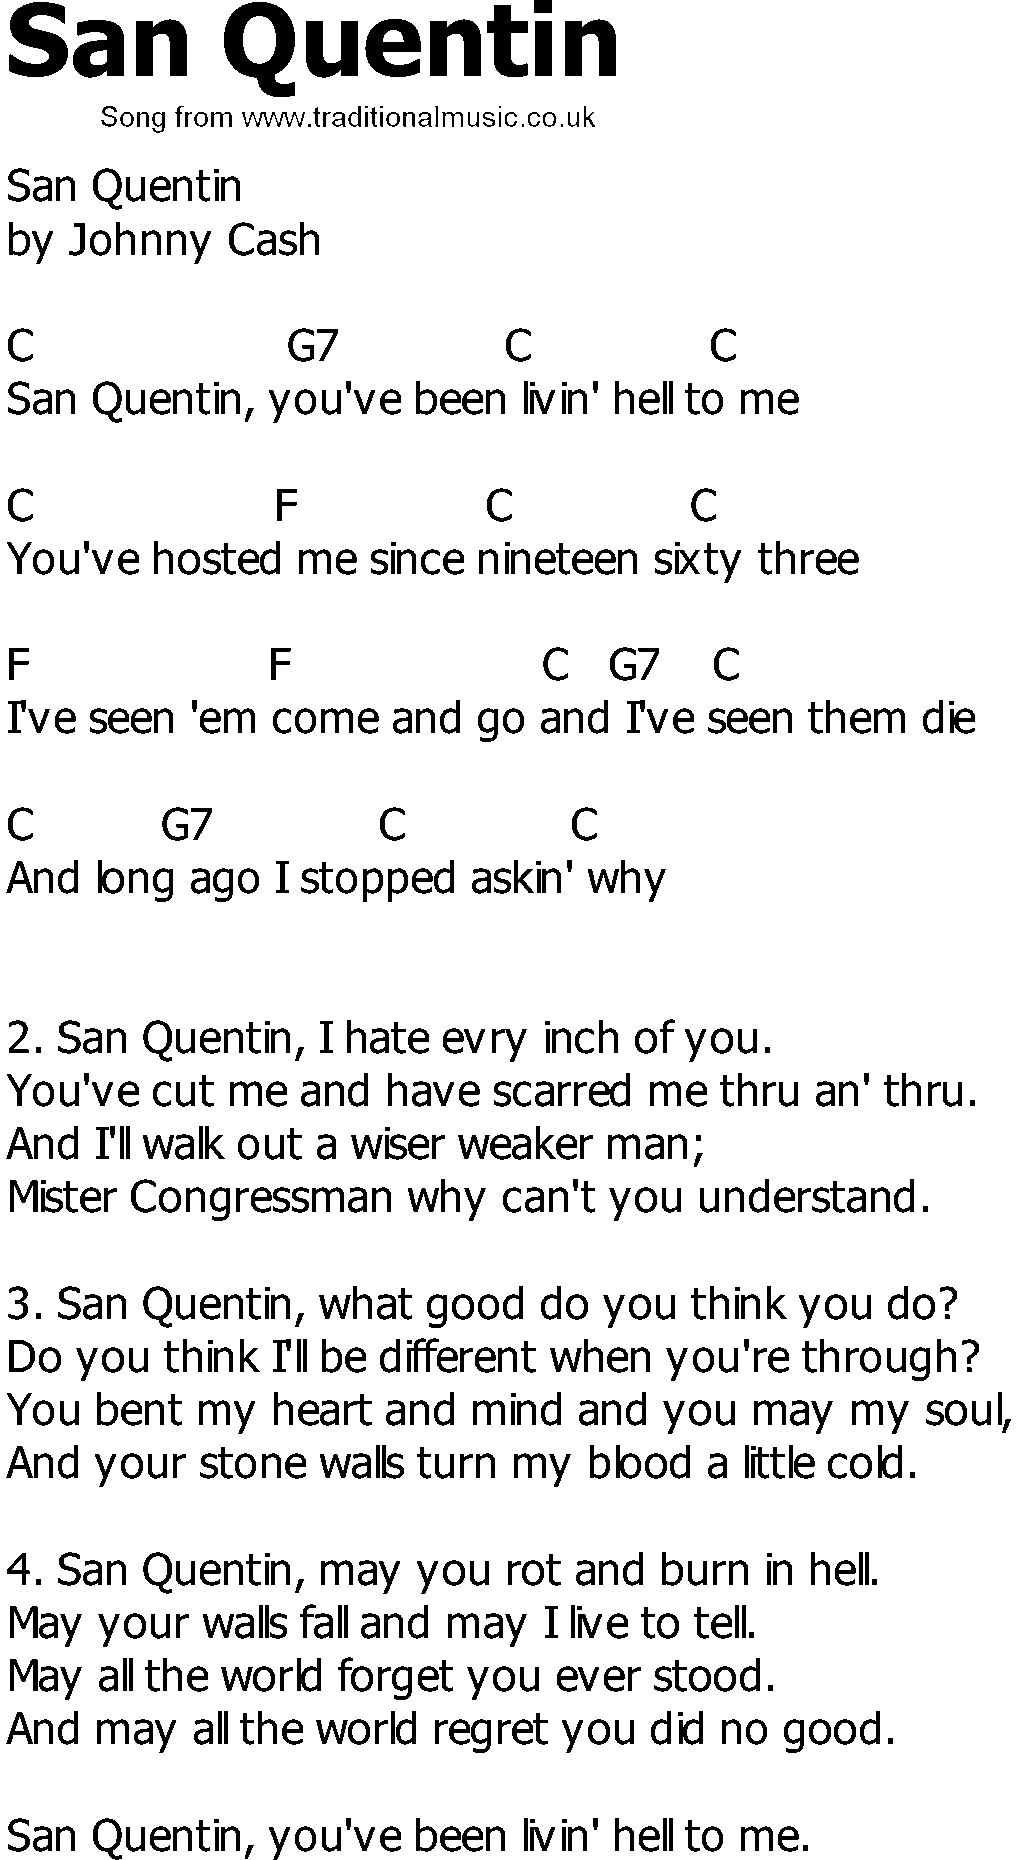 Old Country song lyrics with chords - San Quentin